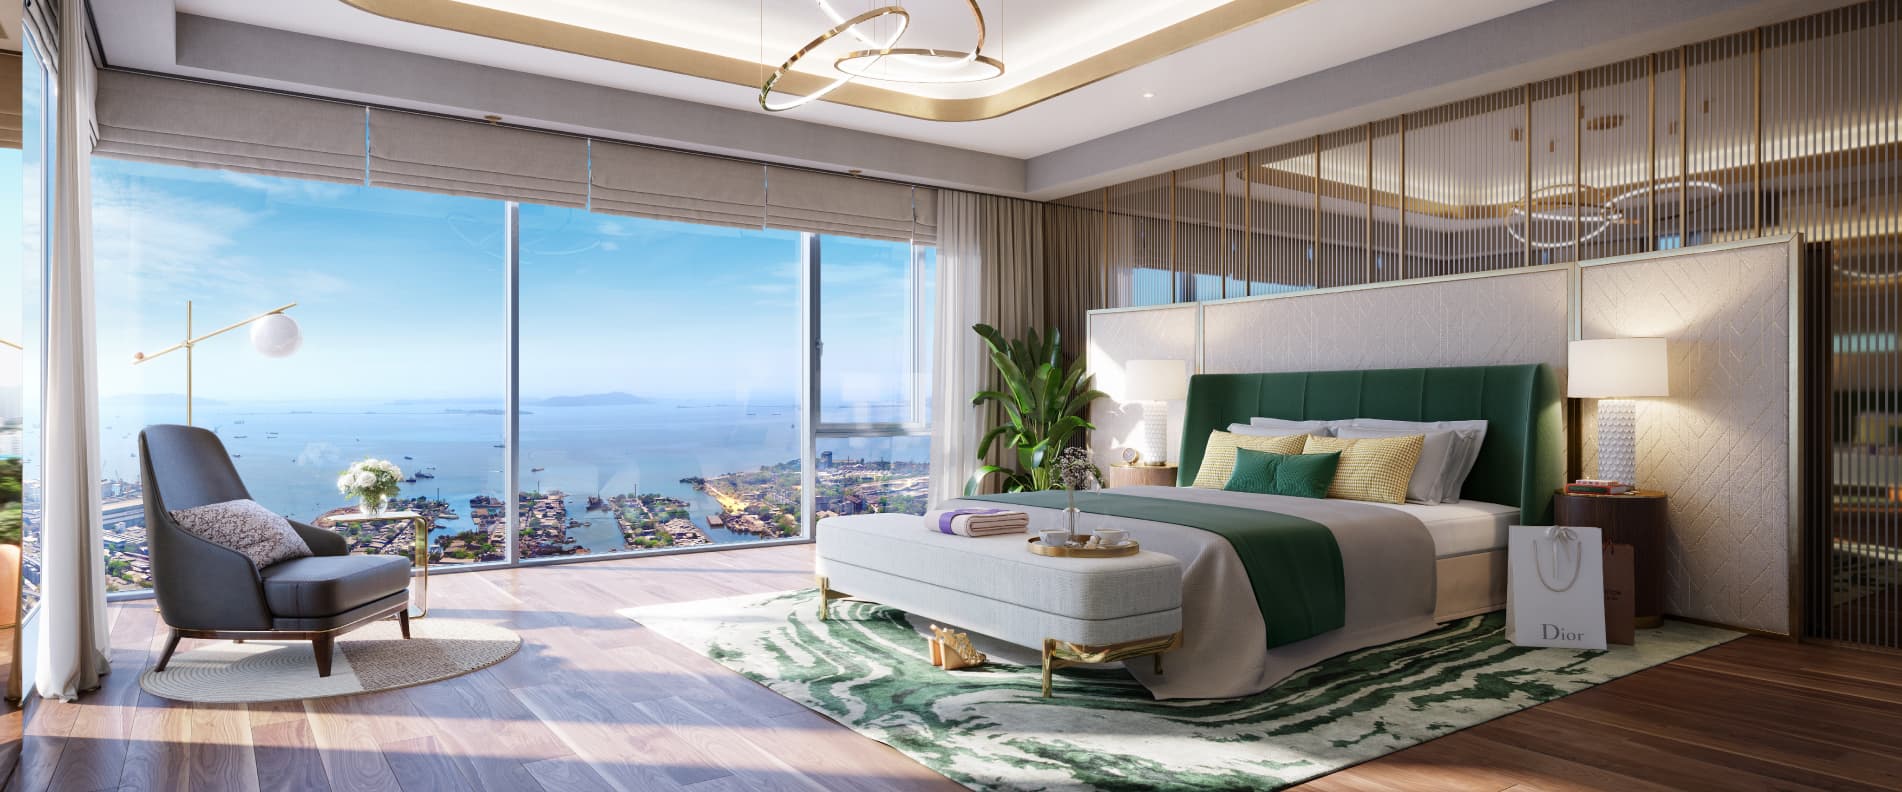 Piramal Aranya's Arav Tower, the tallest in Byculla and one of the tallest residential structures in India, master bedroom view.